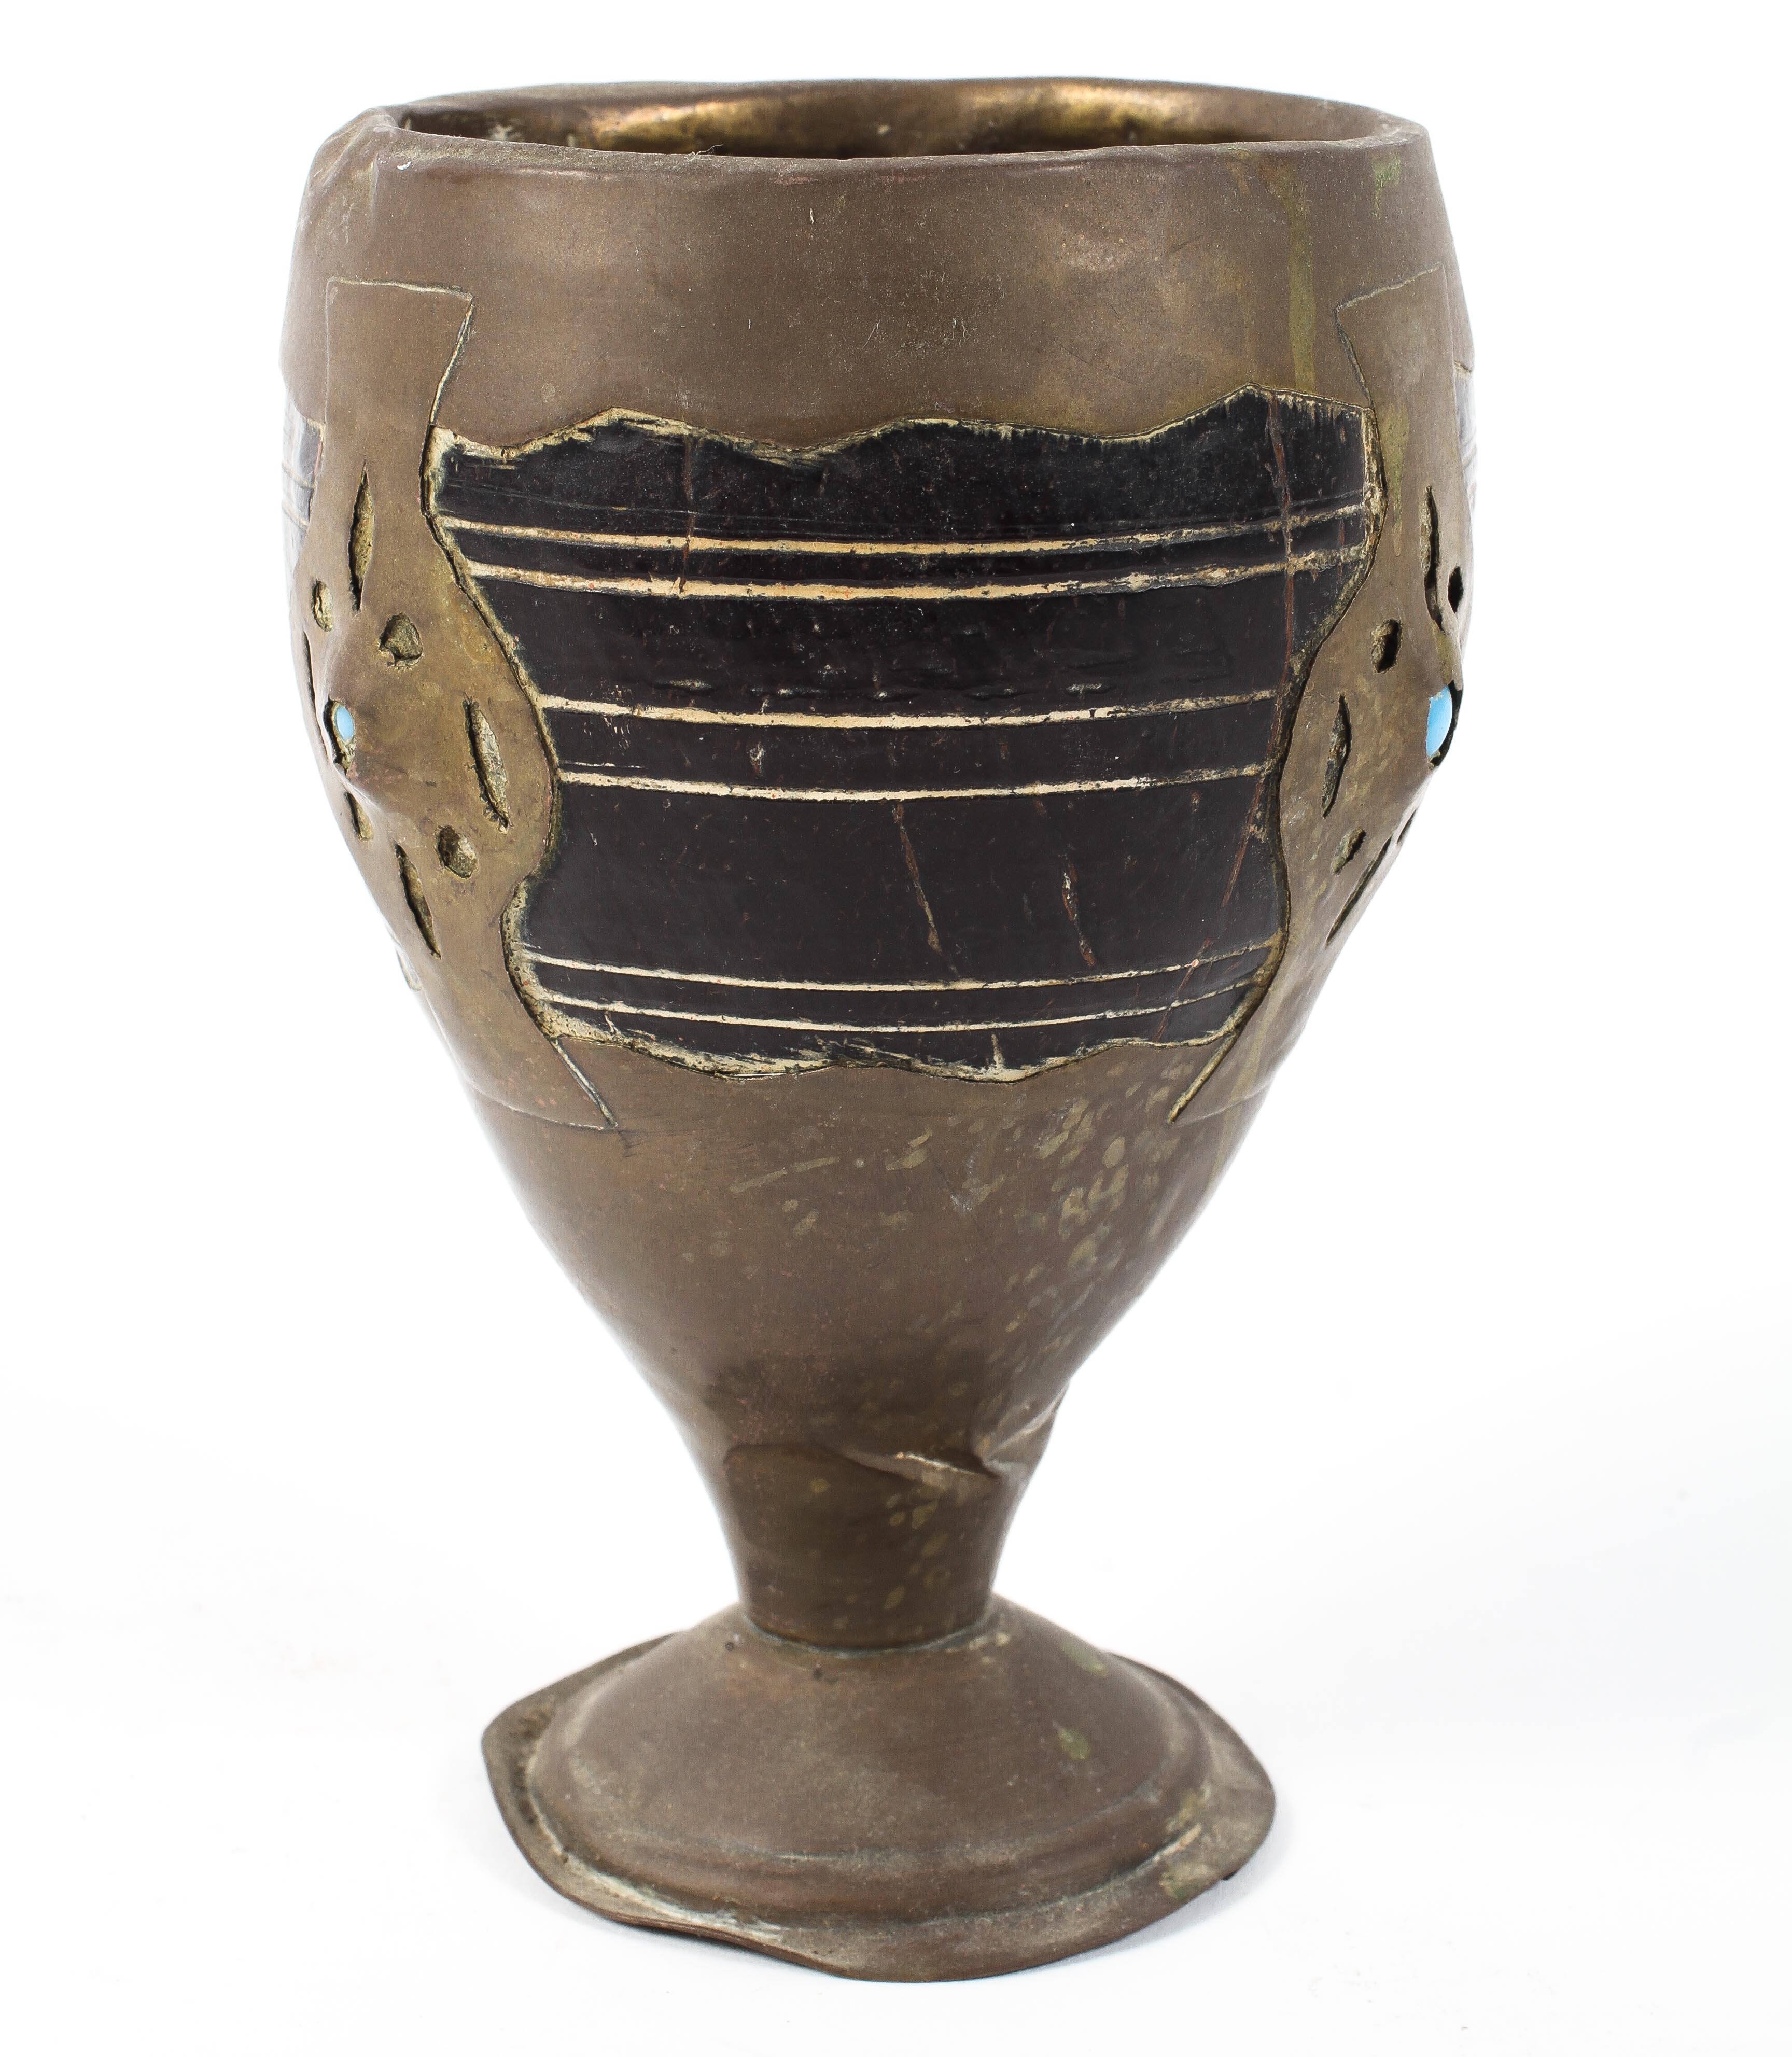 A Middle Eastern Coconut cup set within a brass holder and pedestal decorated with turquoise beads